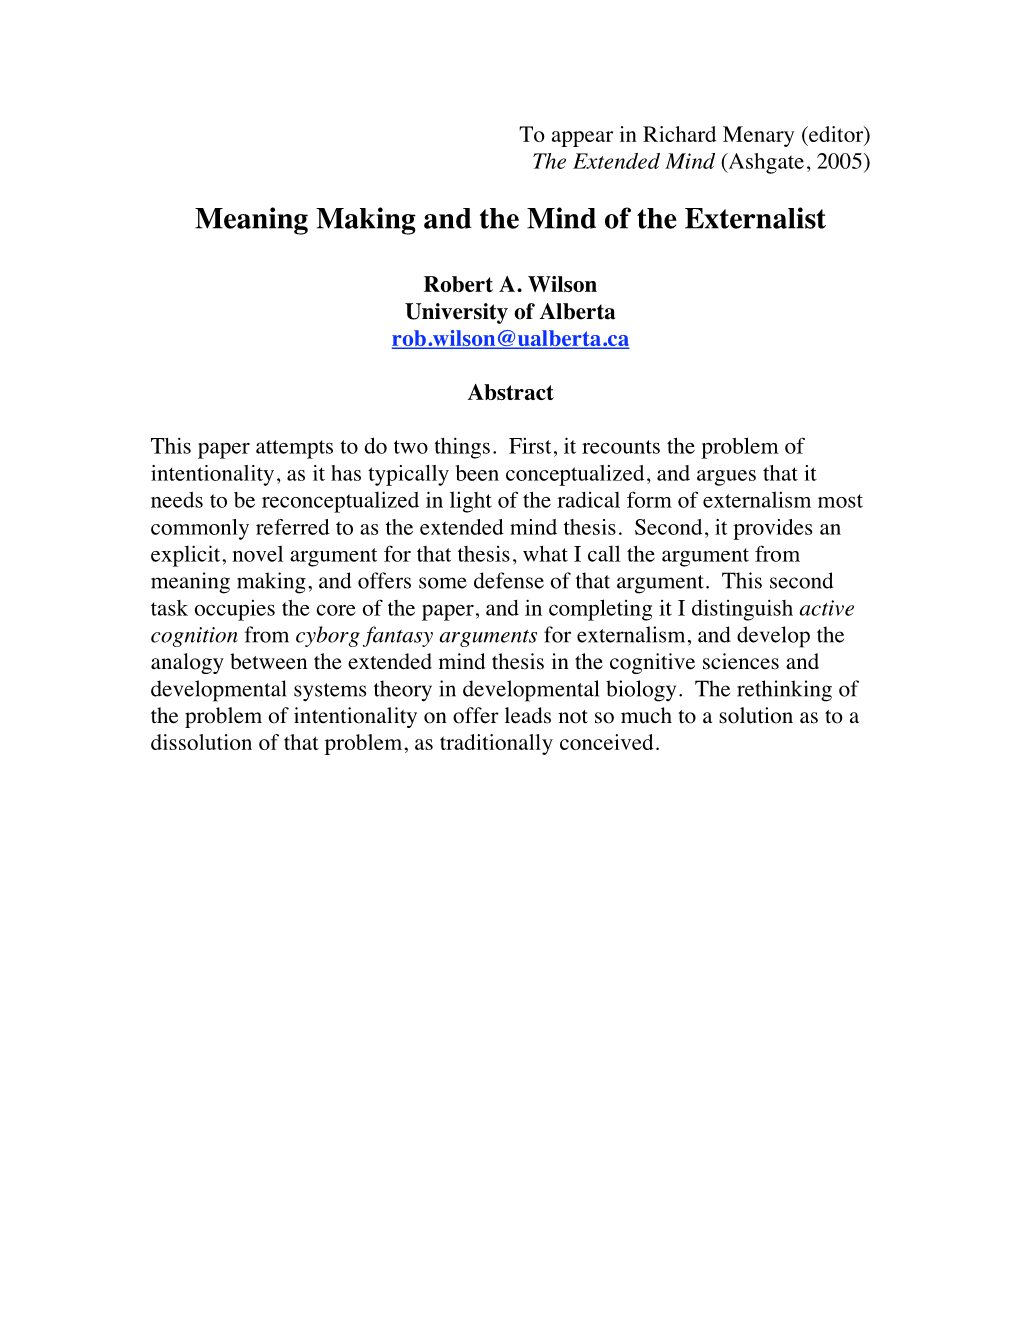 Meaning Making and the Mind of the Externalist